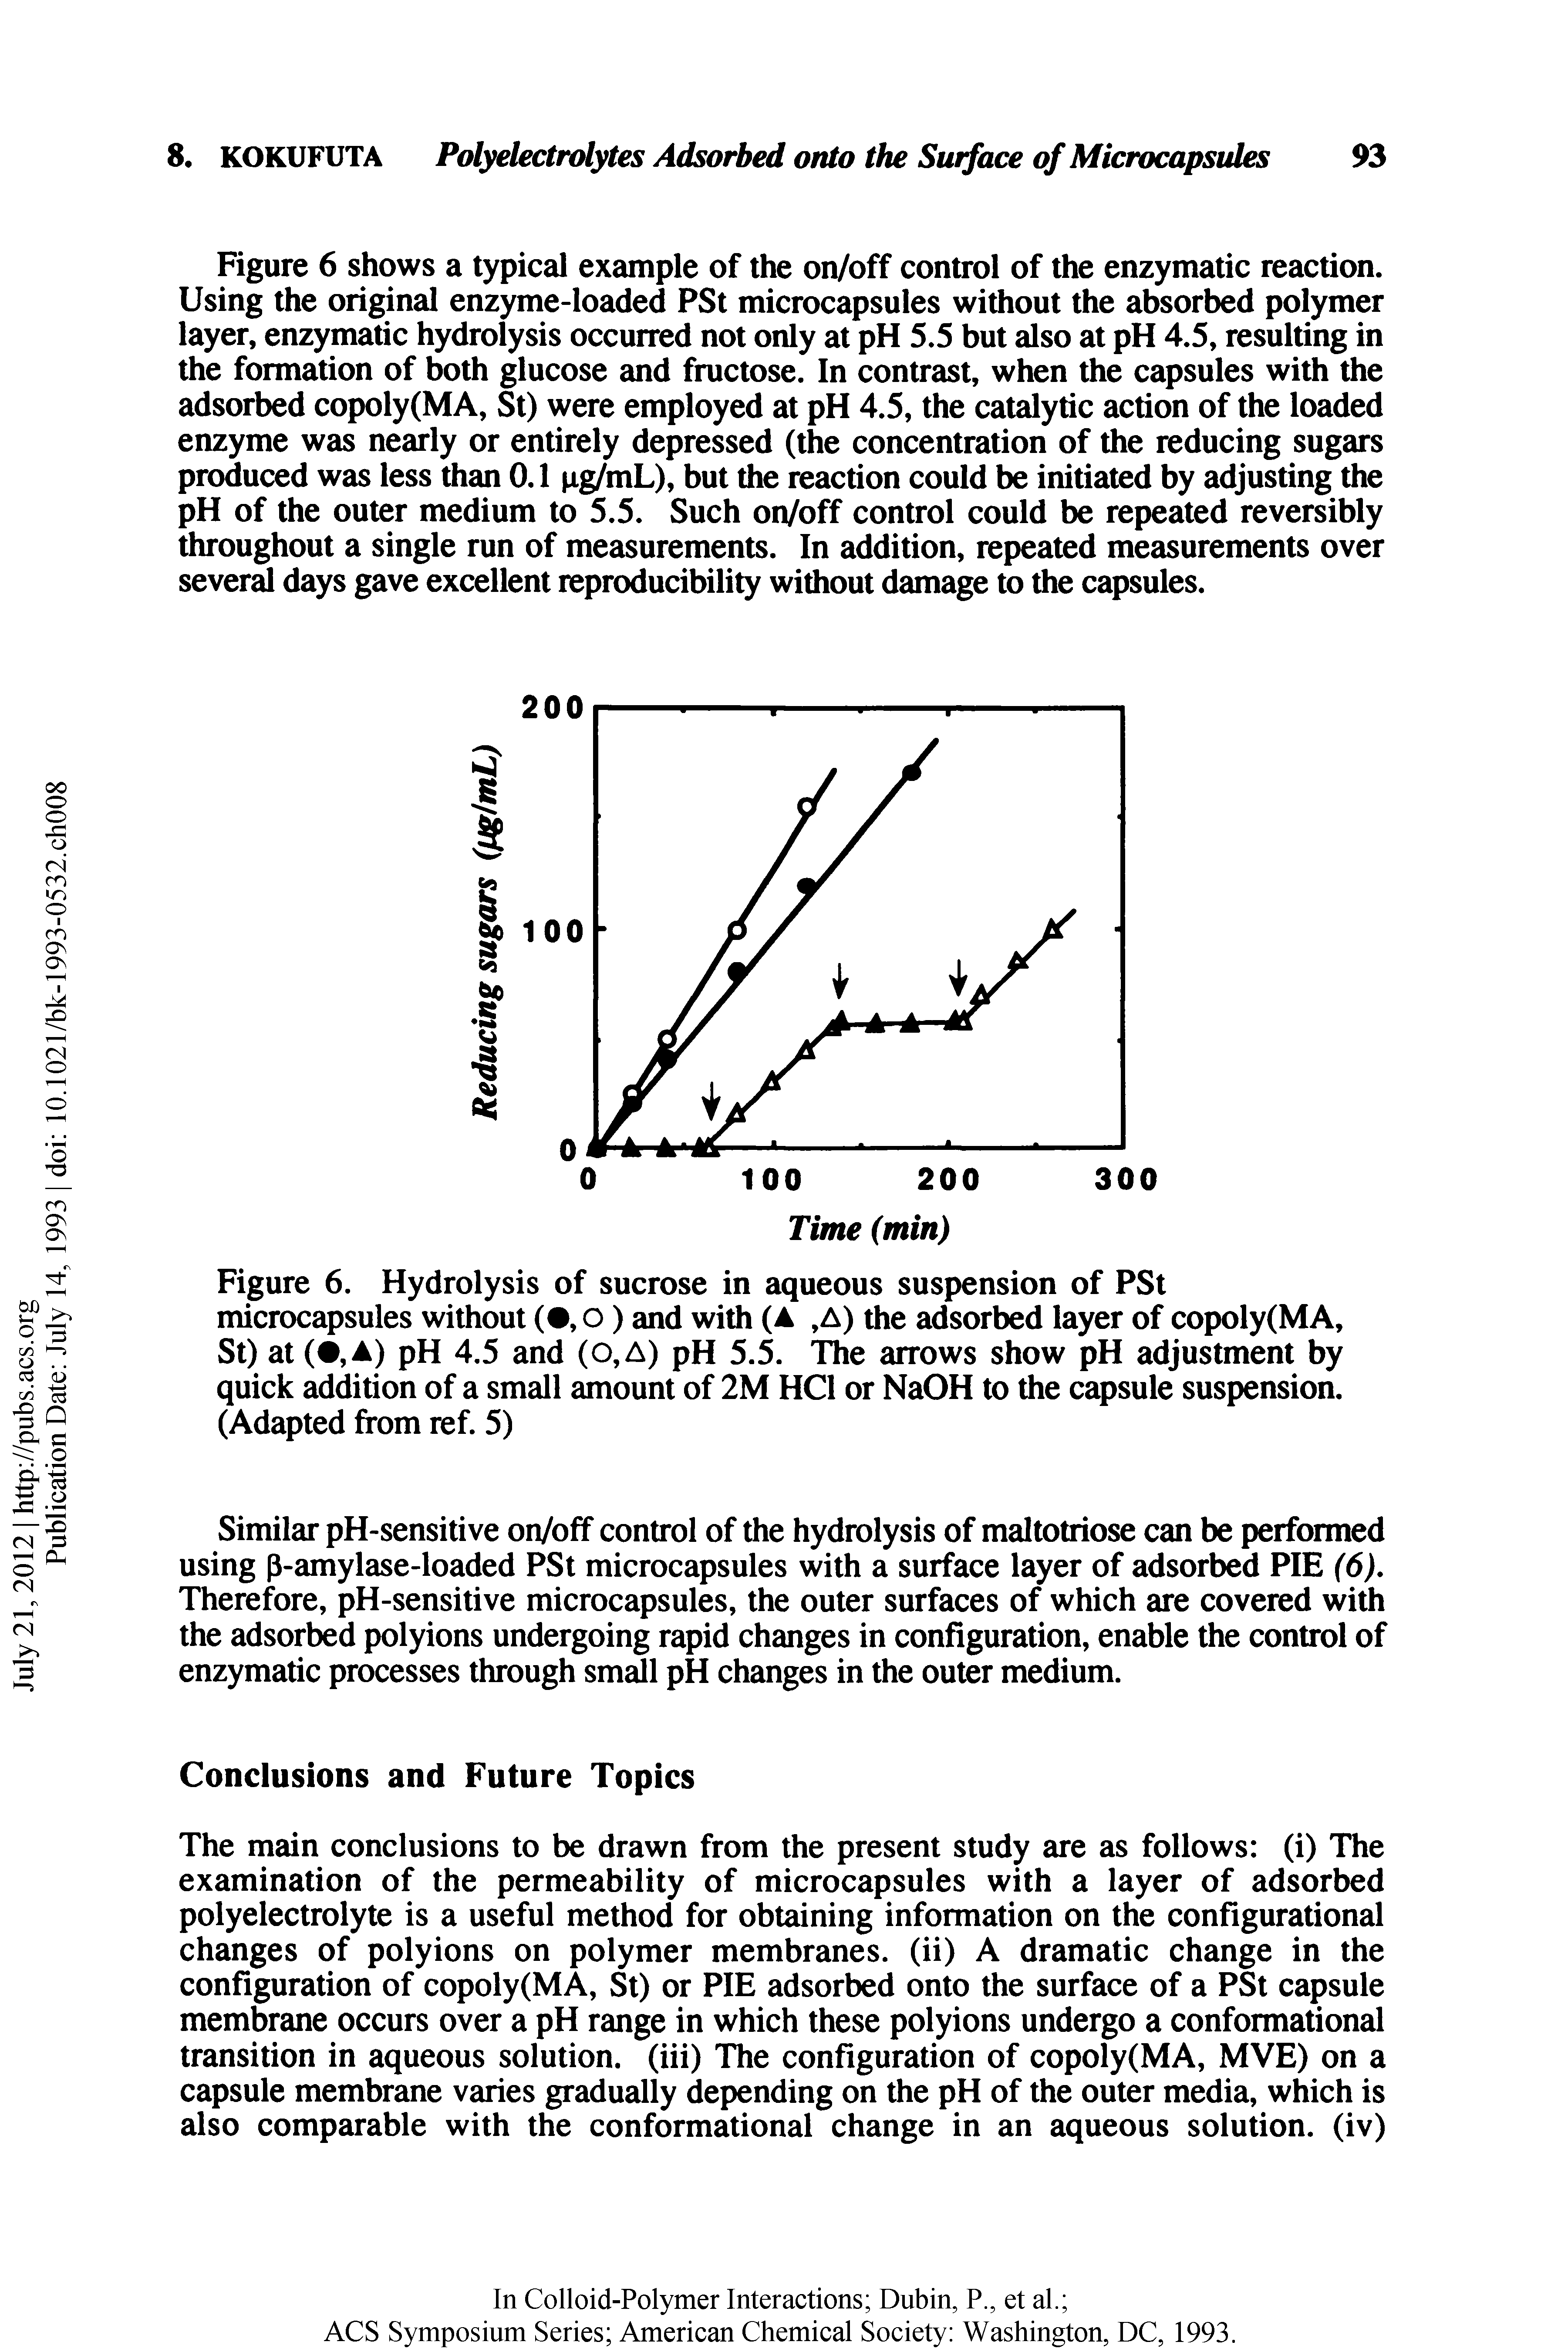 Figure 6. Hydrolysis of sucrose in aqueous suspension of PSt microcapsules without ( , o) and with (A, A) the adsorbed layer of copoly(MA, St) at (, A) pH 4.5 and (o, A) pH 5.5. The arrows show pH adjustment by quick addition of a small amount of 2M HCl or NaOH to the capsule suspension. (Adapted from ref. 5)...